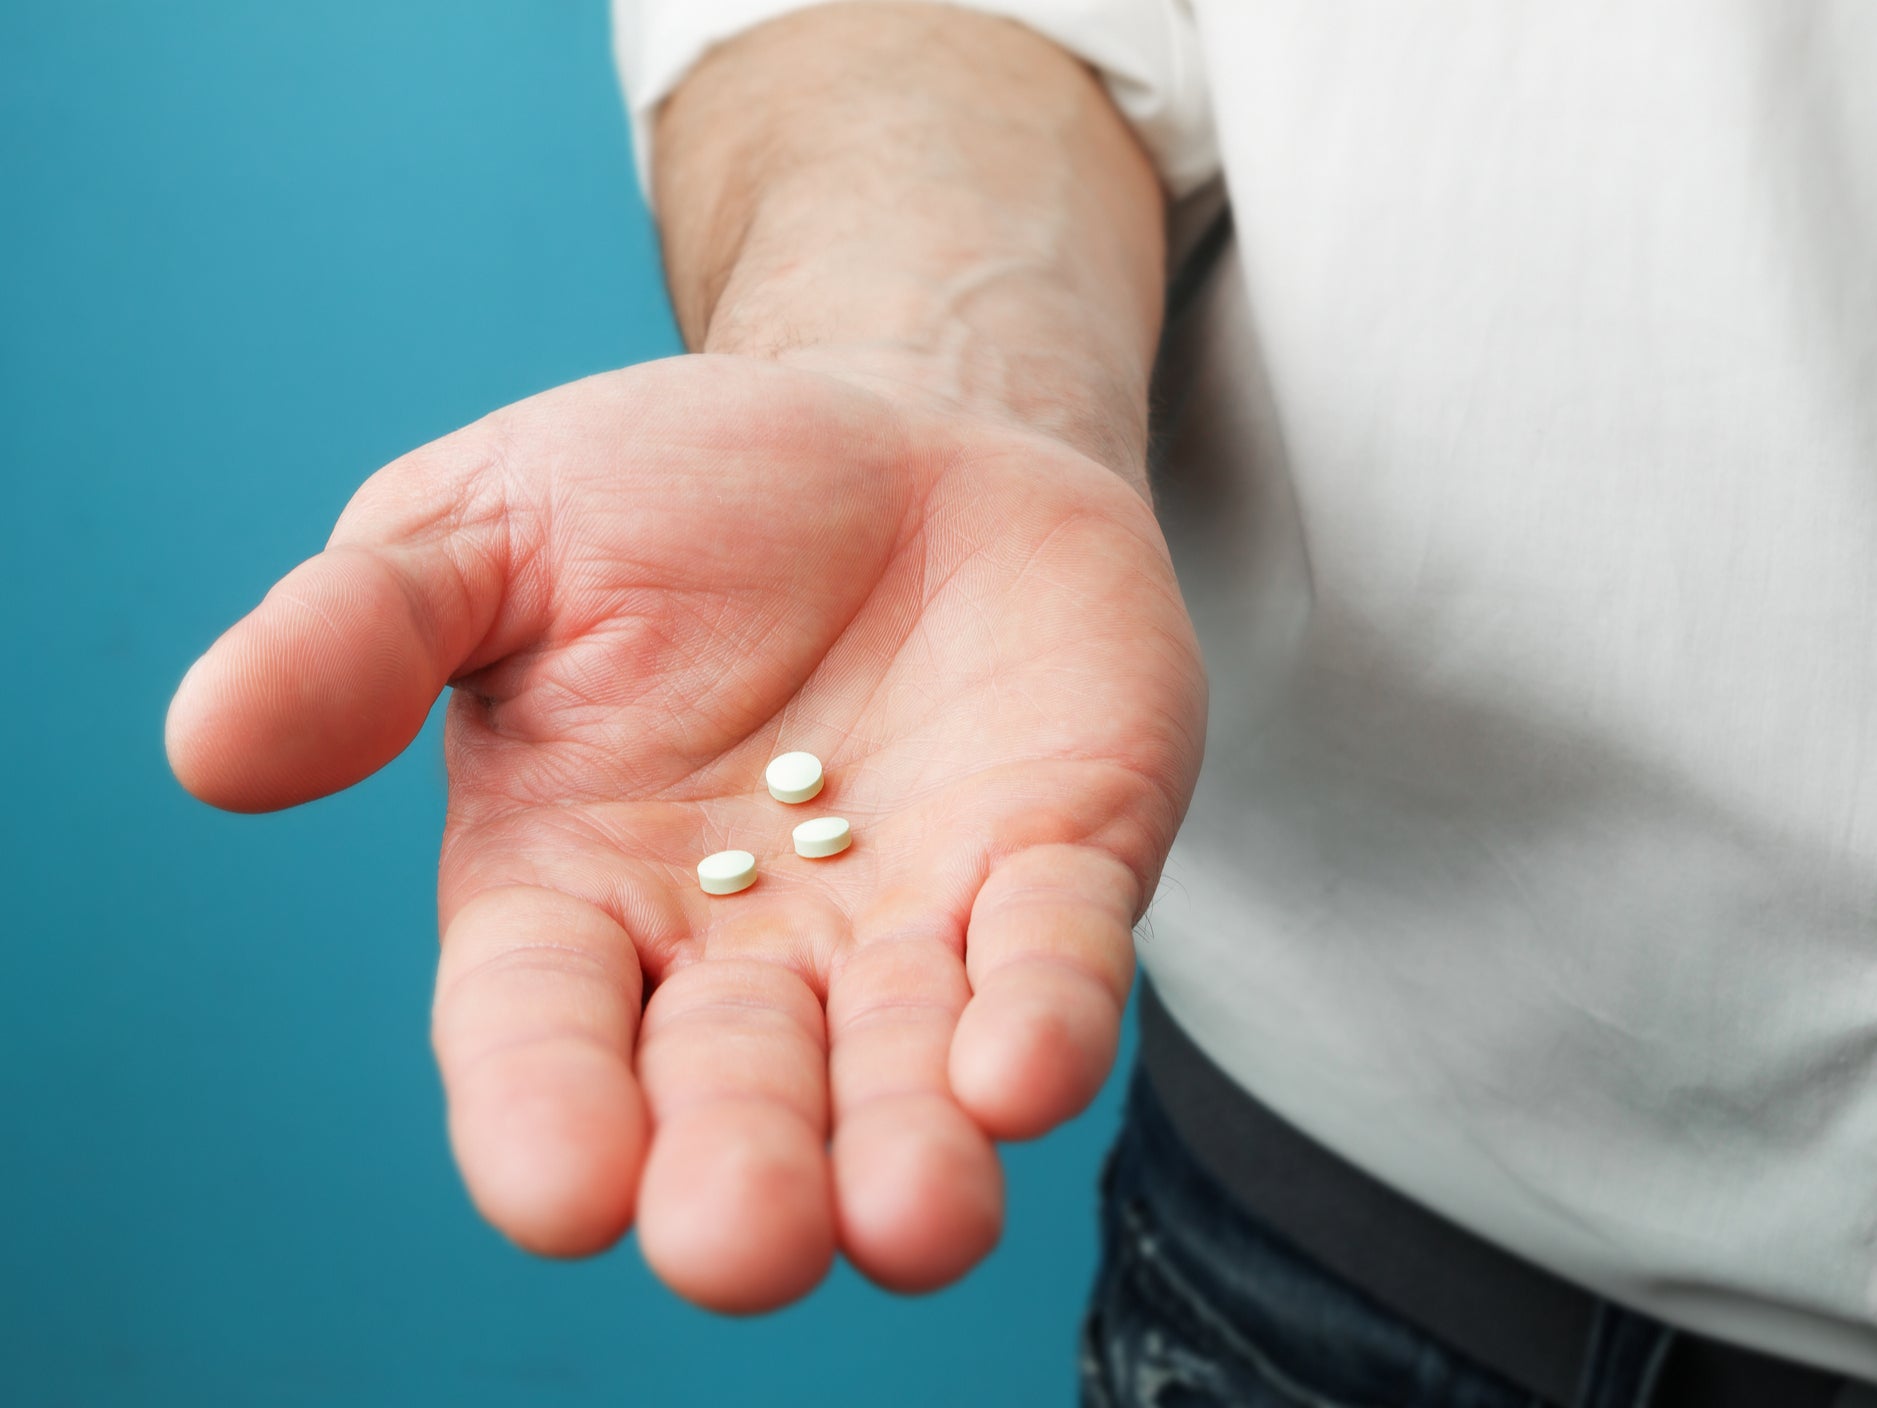 “The female pill has been available for 60 years now, and the male pill has lagged behind”